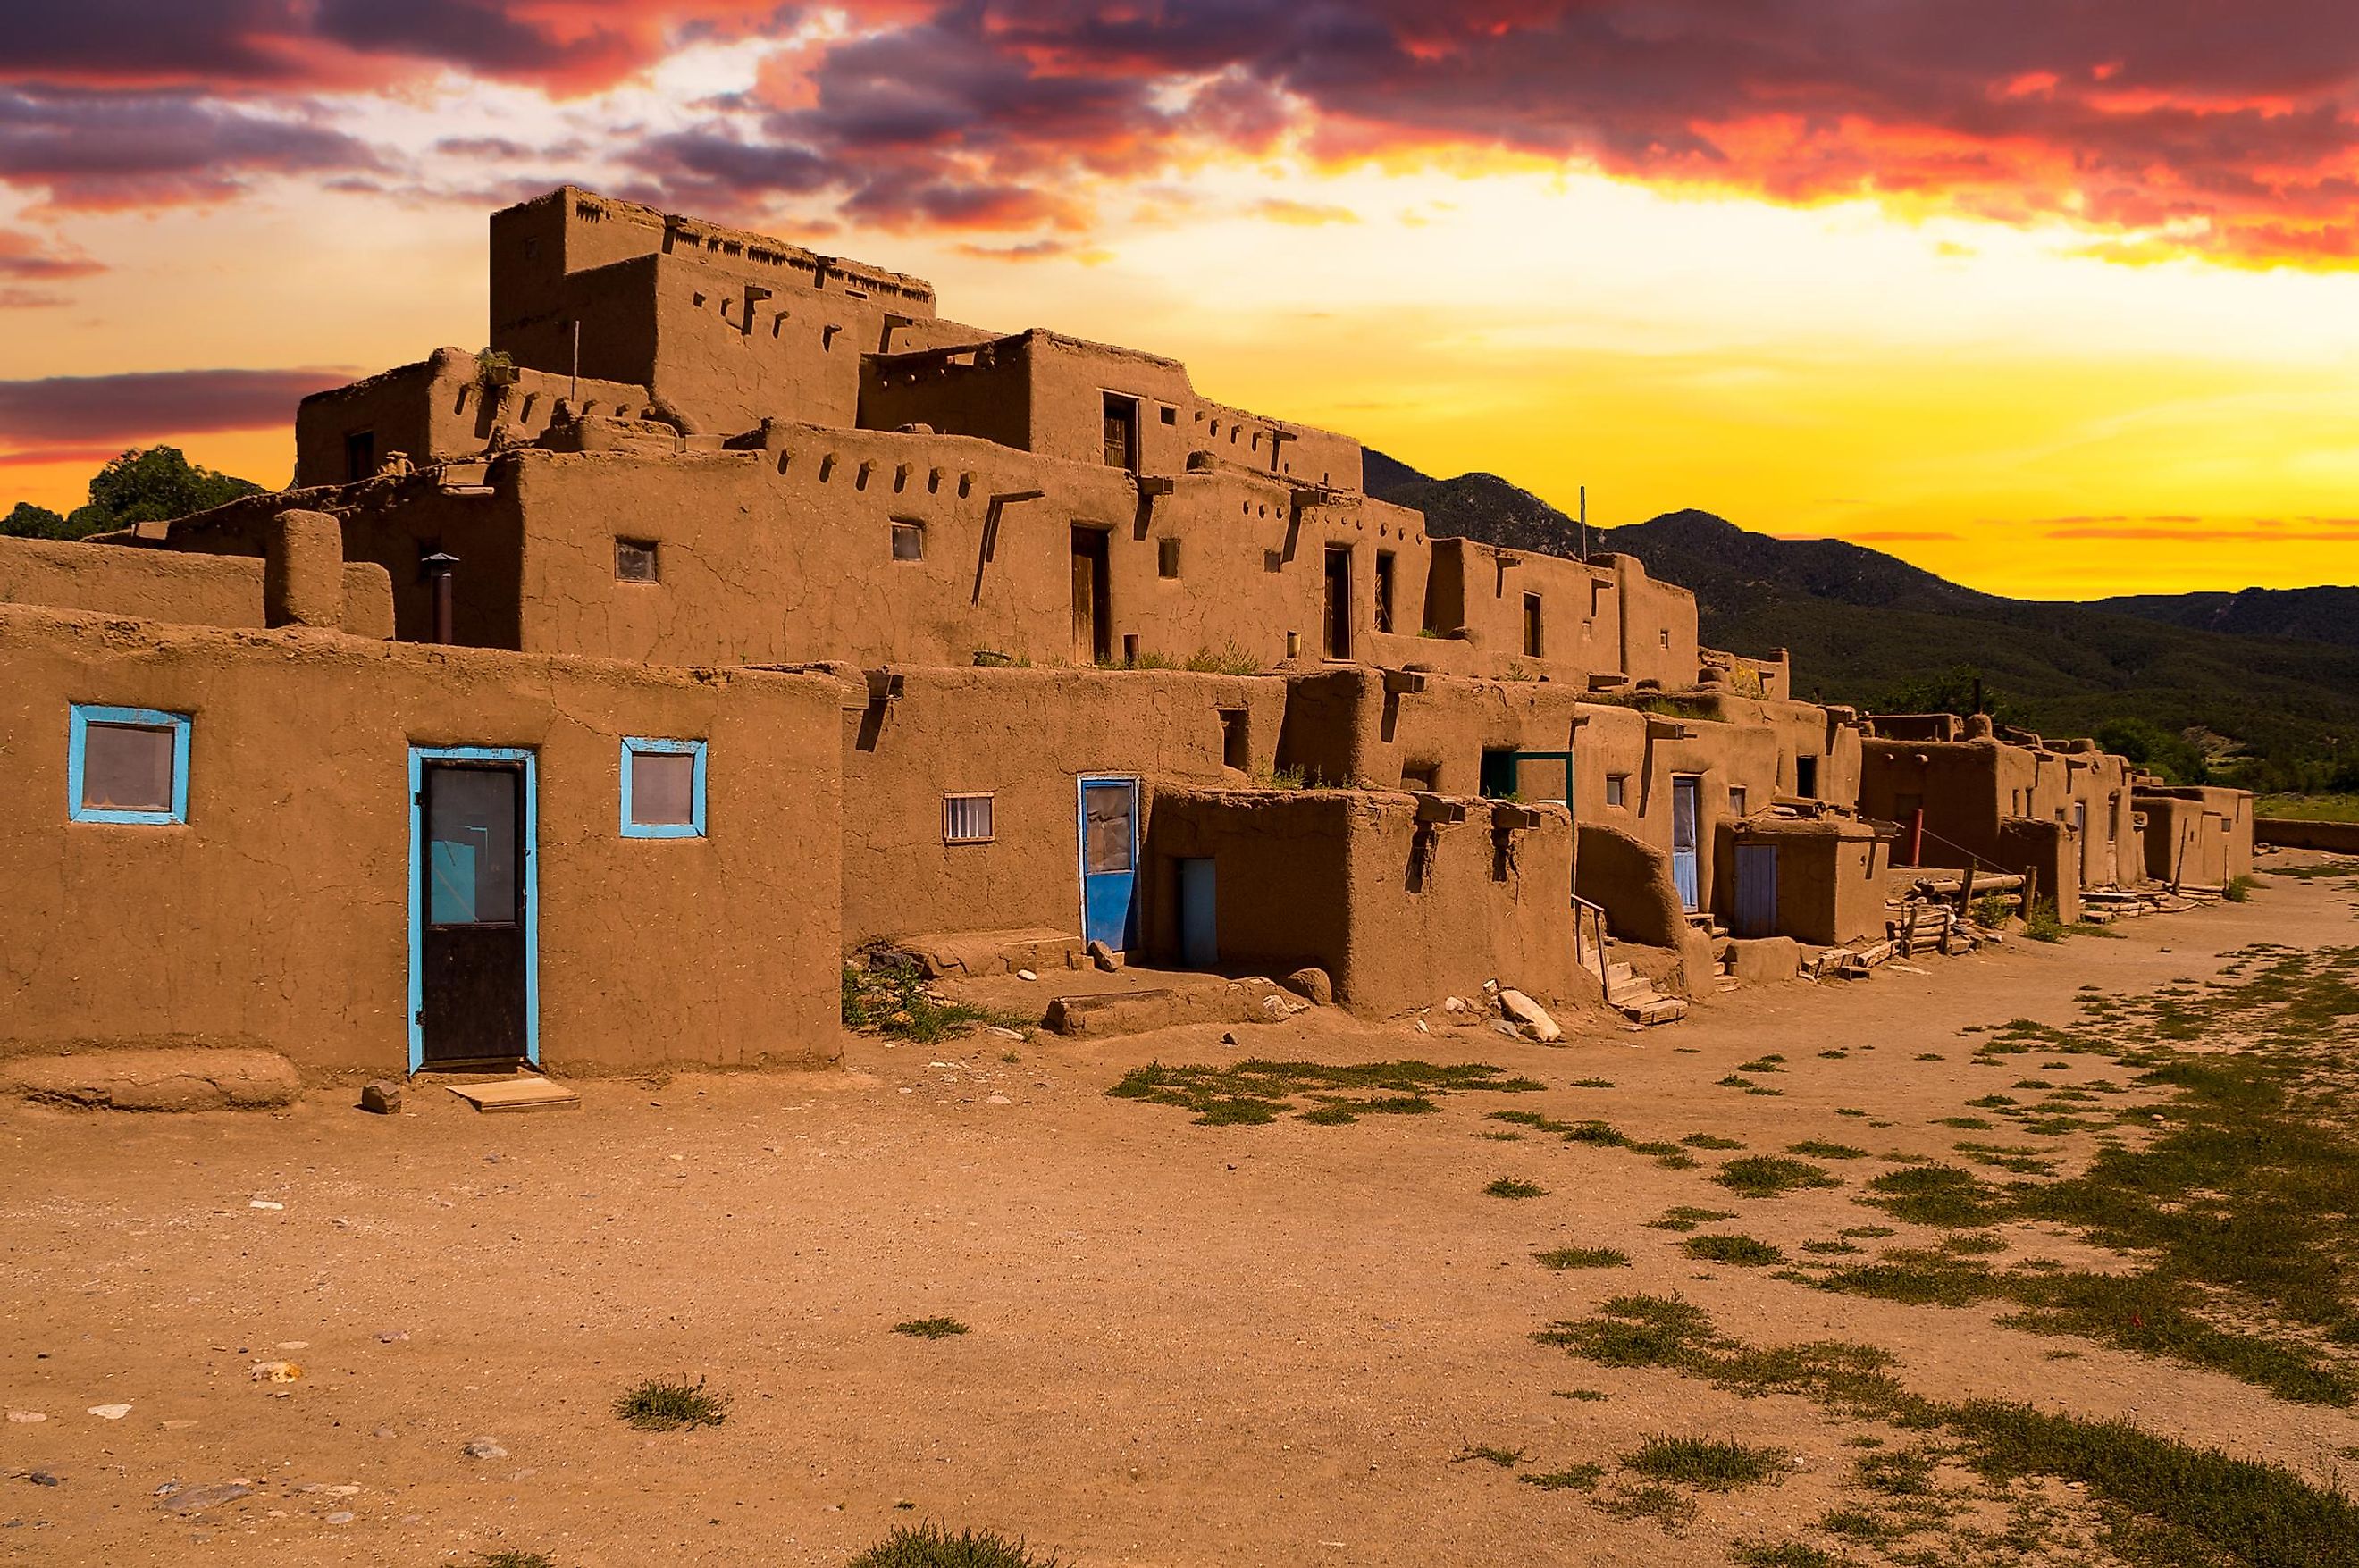 Ancient dwellings of UNESCO World Heritage Site named Taos Pueblo in New Mexico. Taos Pueblo is believed to be one of the oldest continuously inhabited settlements in the USA.